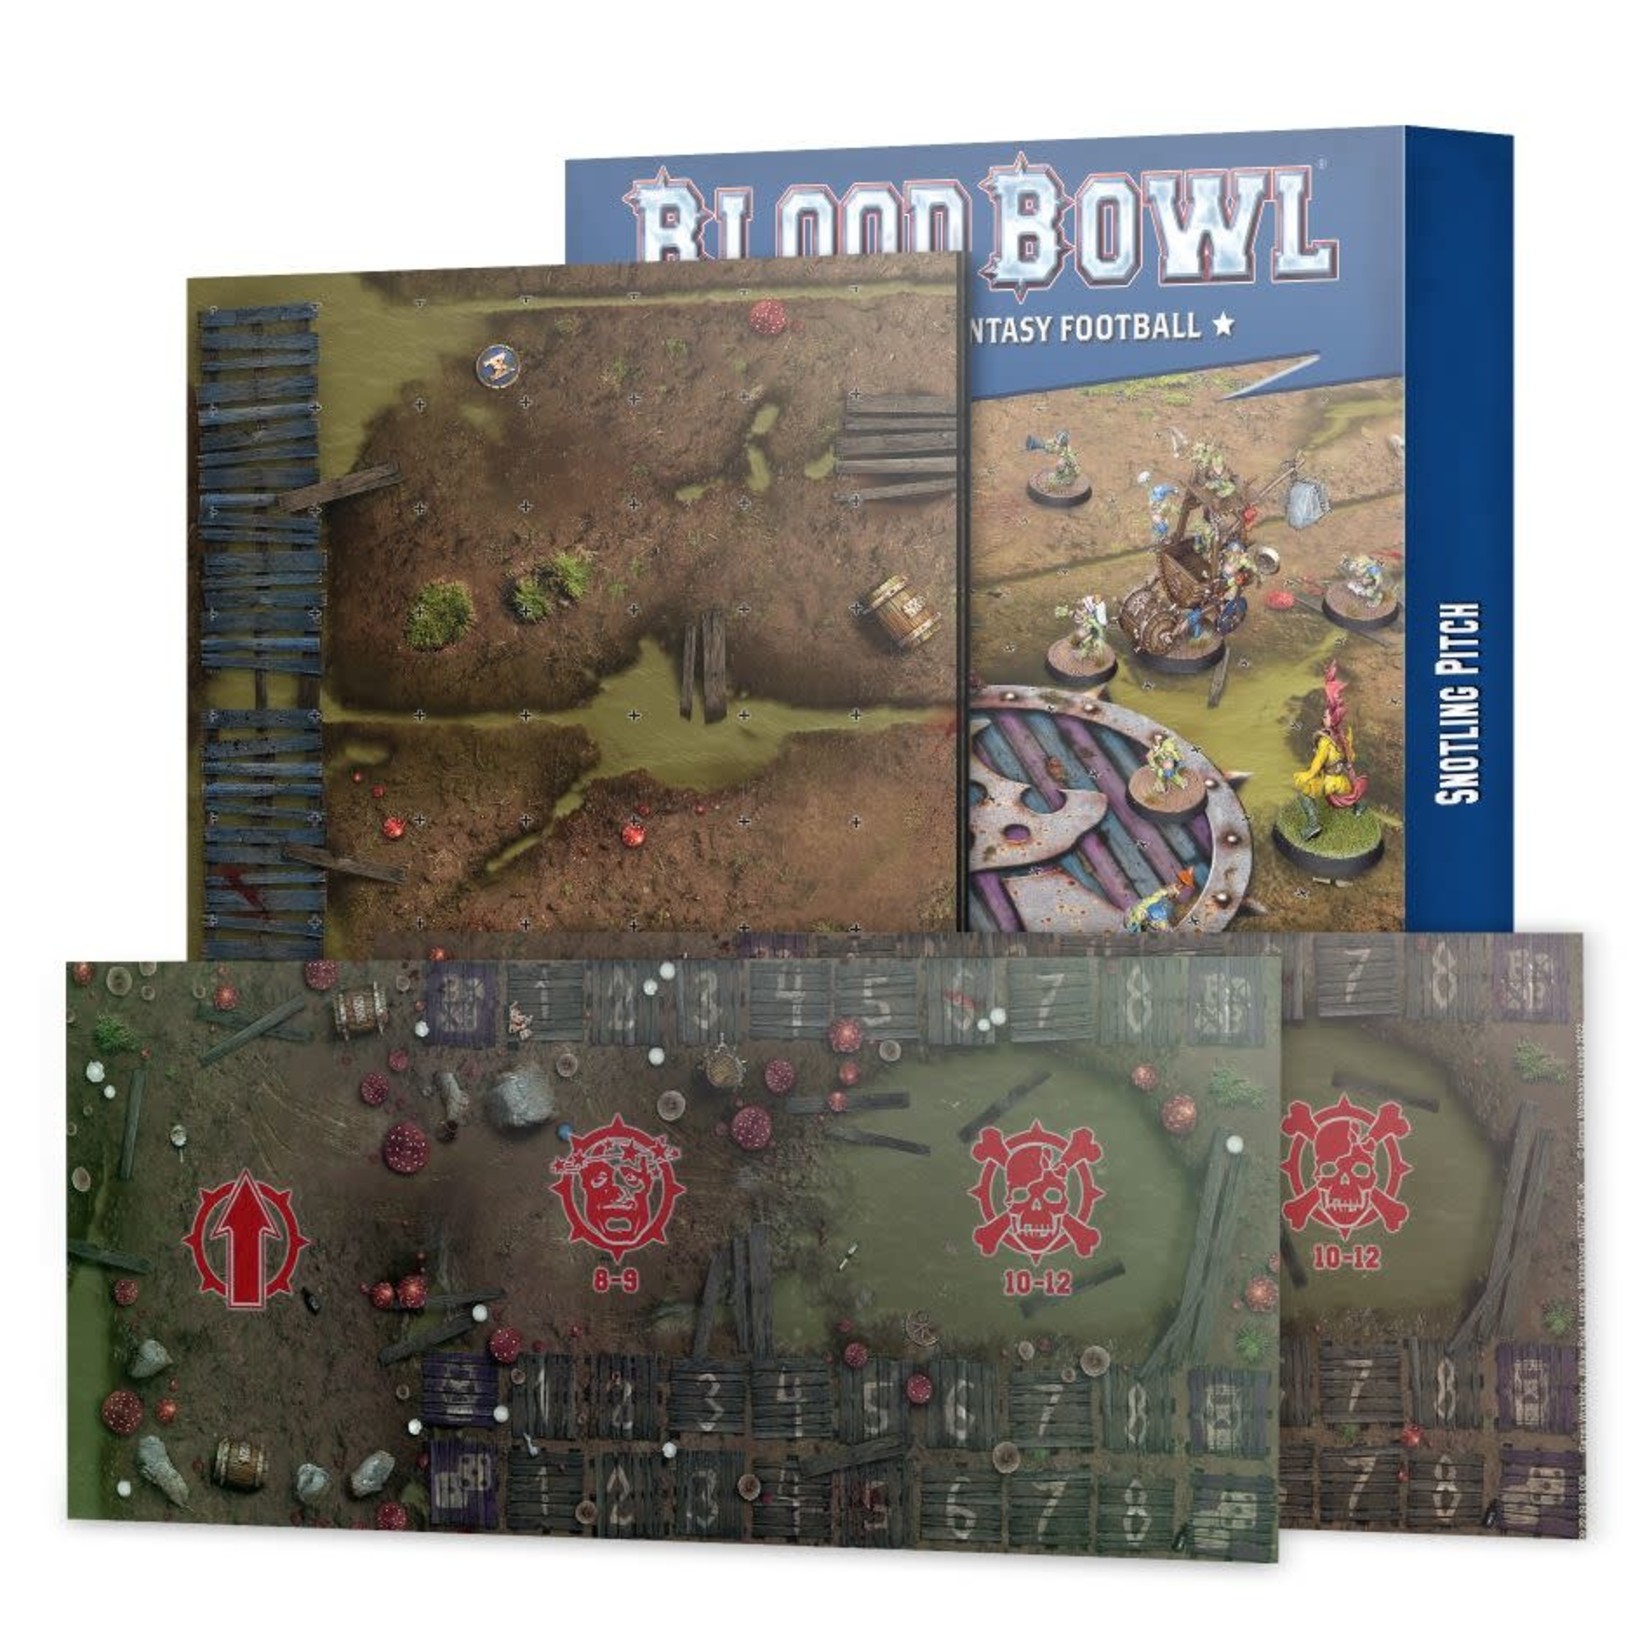 Bloodbowl Snotling Pitch and Dugouts